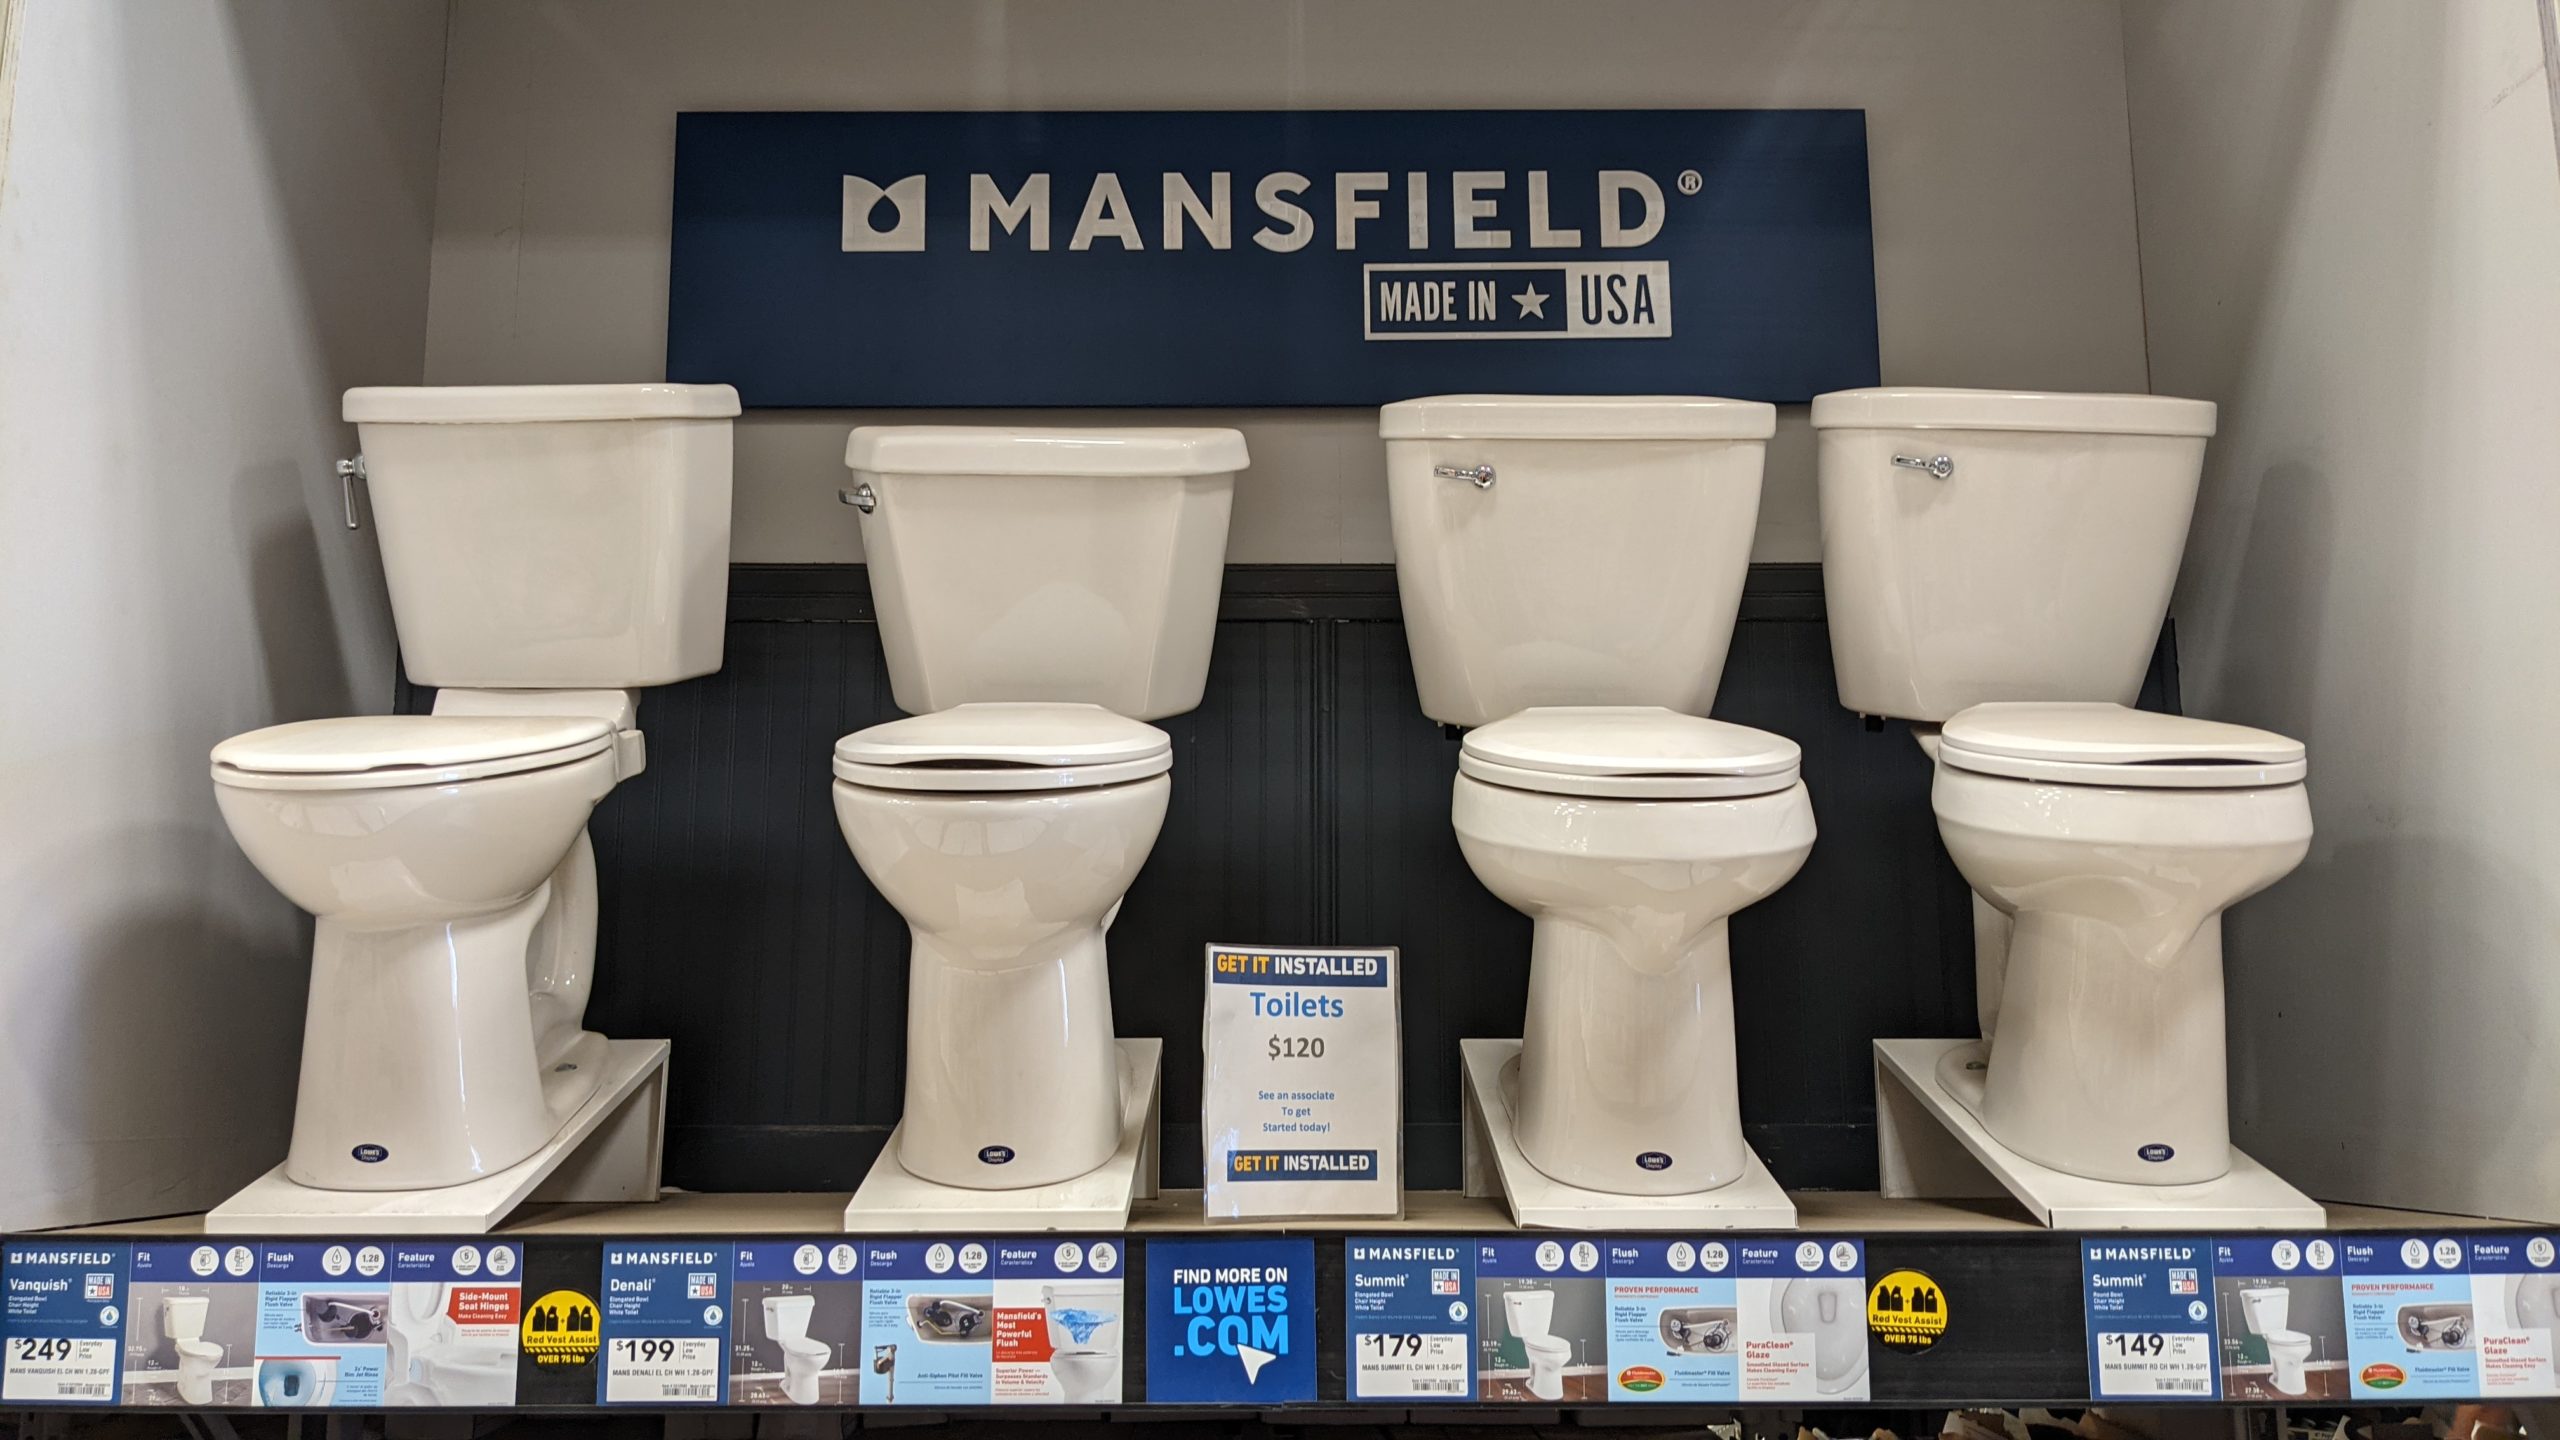 Mansfield toilets on display at Lowe's